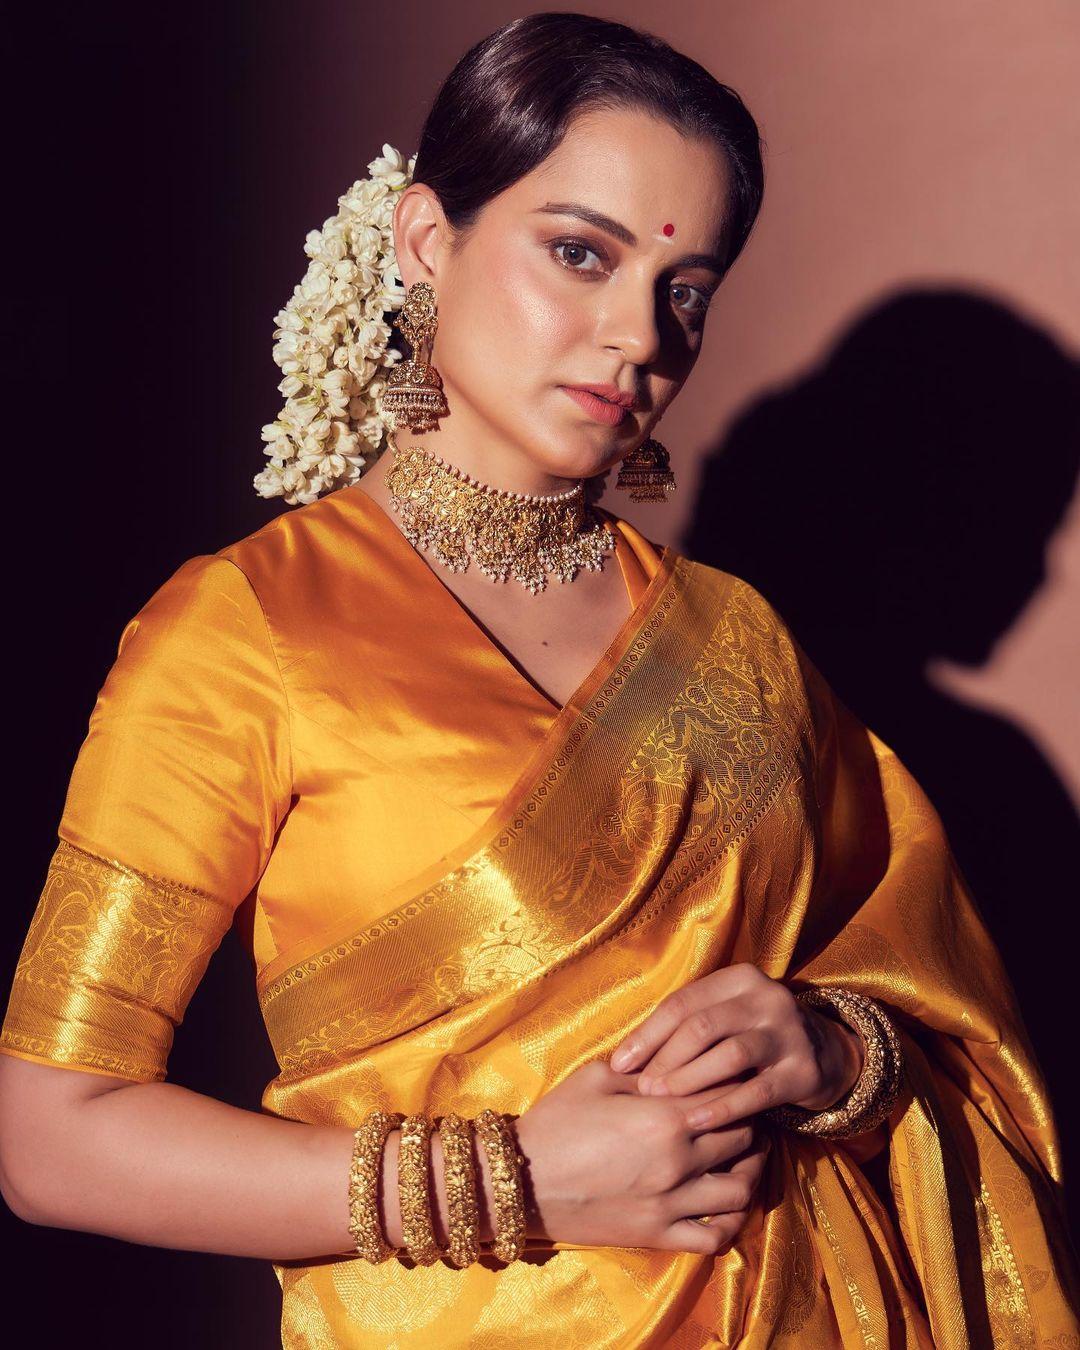 In this look, Kangana wore a stunning golden saree with a matching yet intricate border. Kangana paired her saree with a matching blouse. With her hair tied in a bun, the actress elevated her hairstyle with a beautiful gajra